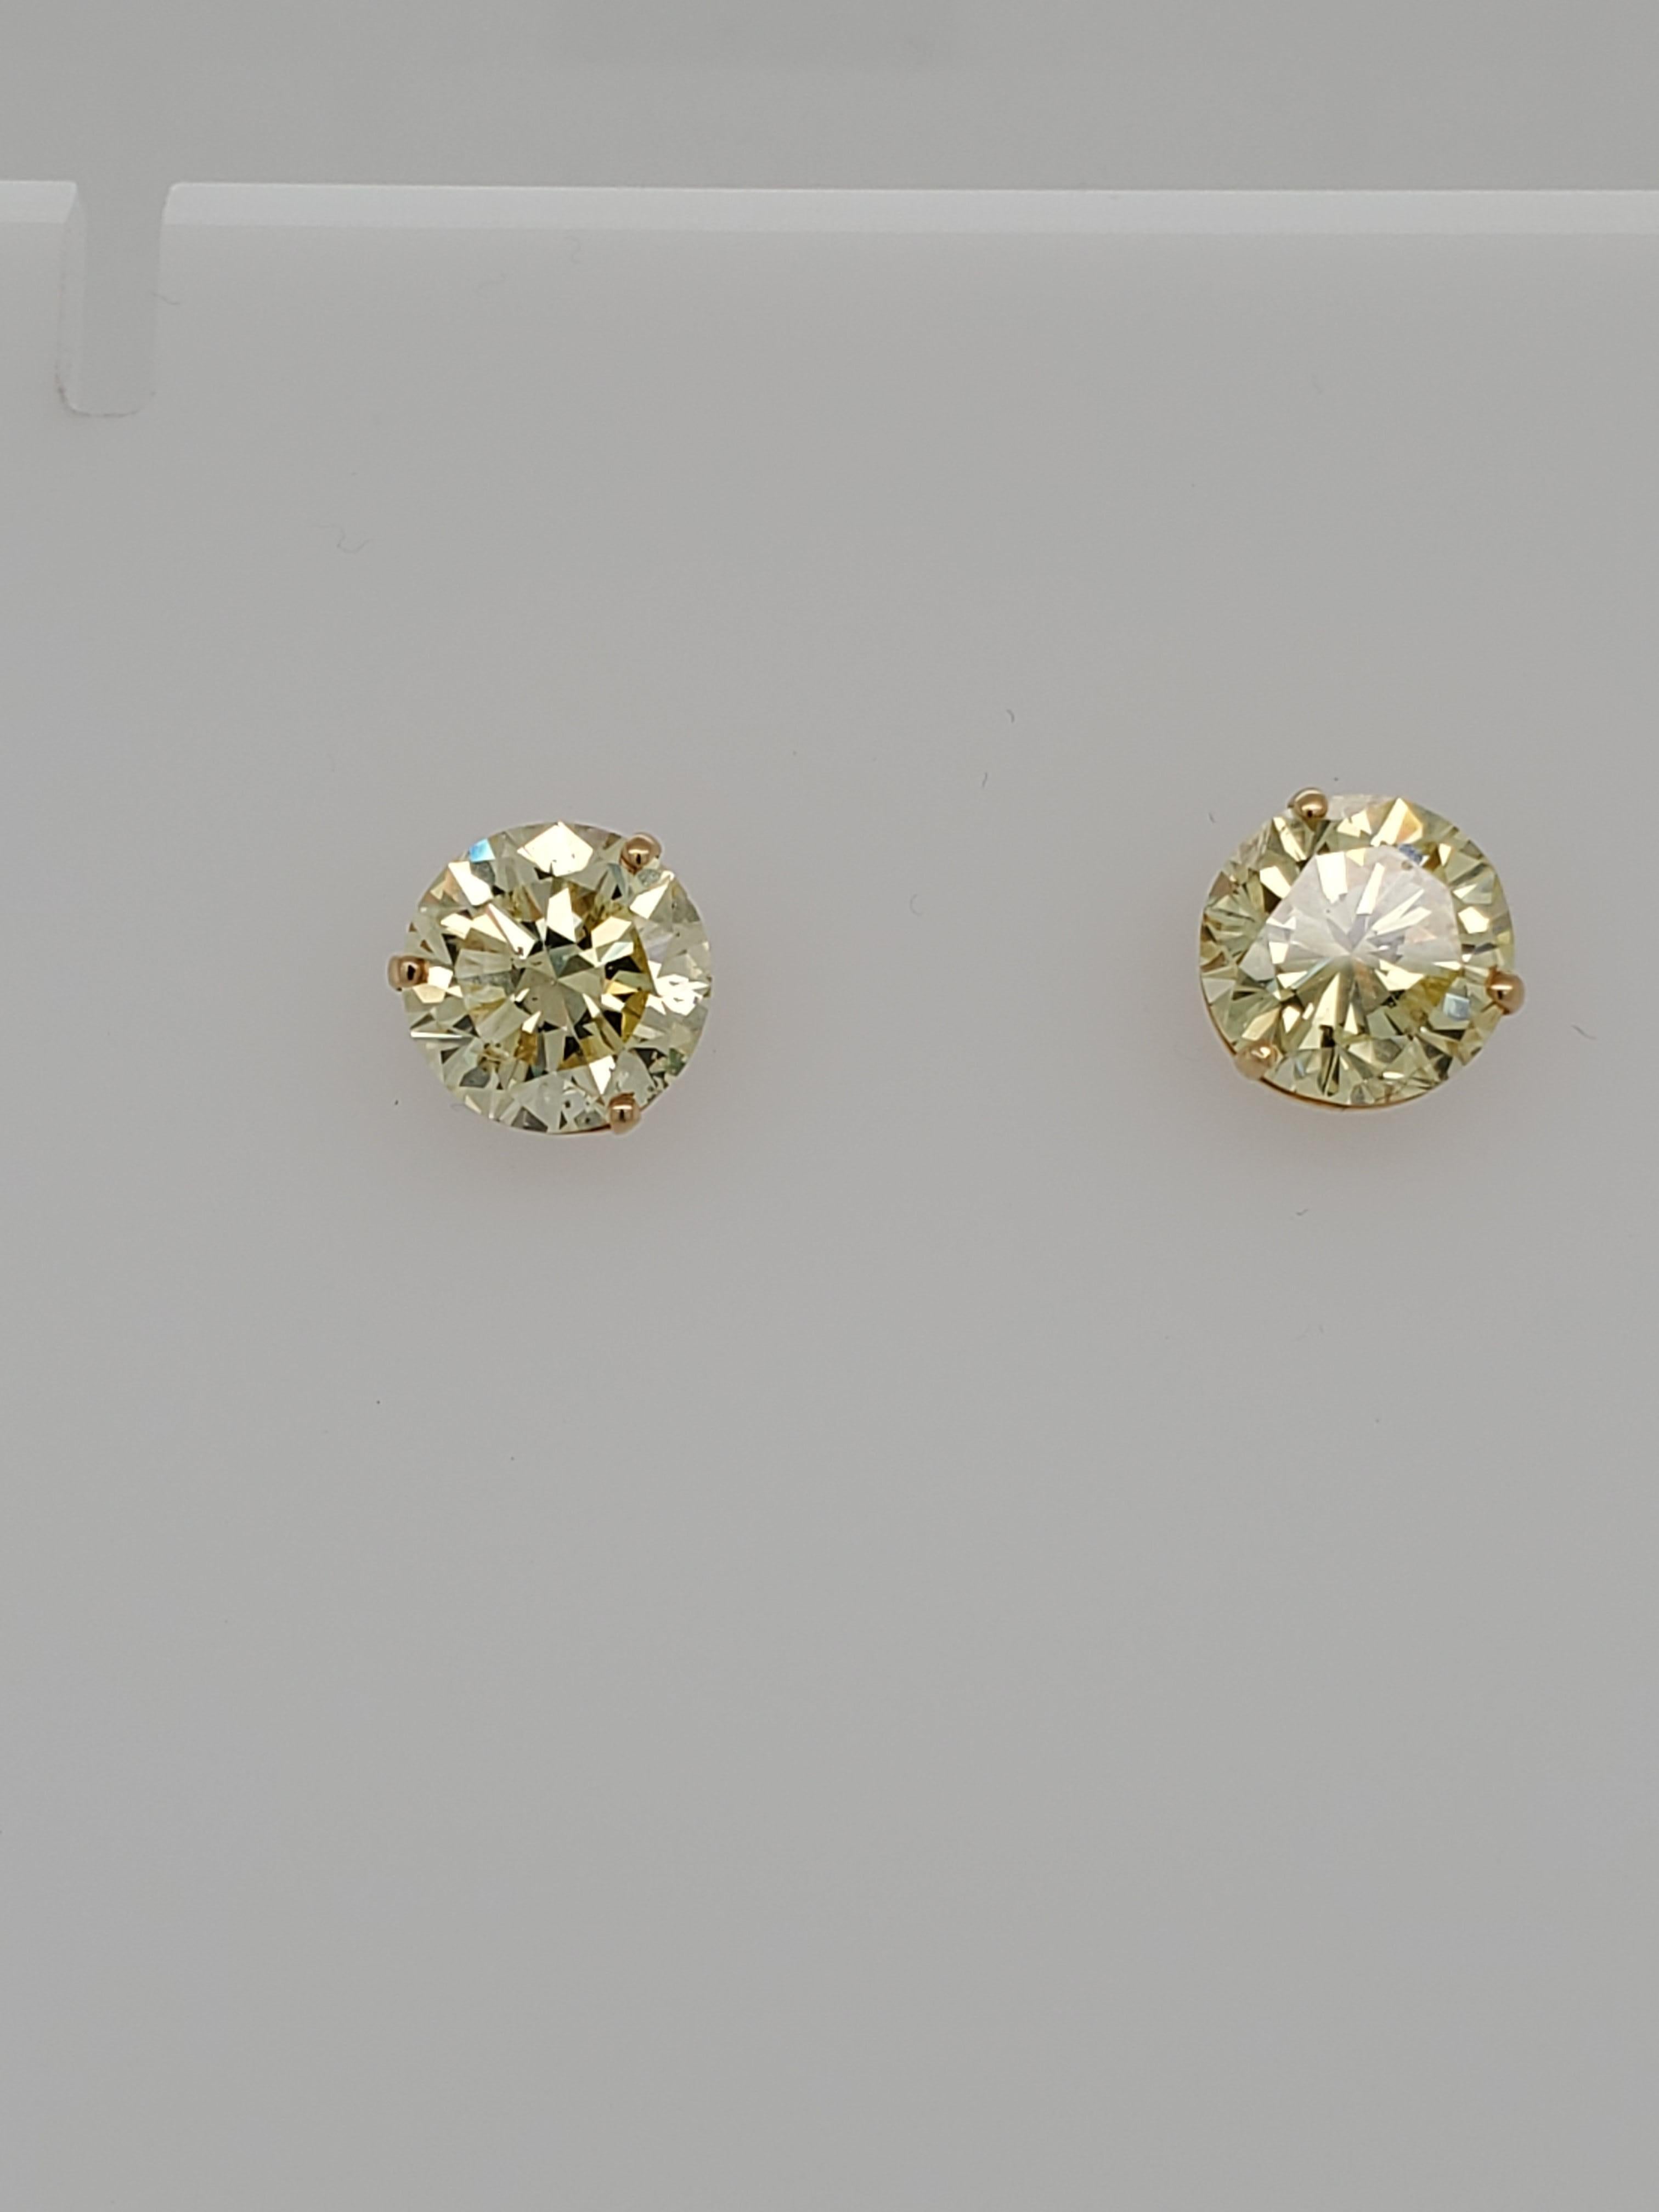 GIA Certified Round Diamonds Cut to match. One weights 3.86 carats and is a Fancy Intense Yellow SI2 clarity and the second is 3.87 carats Fancy Yellow VVS2 clarity. Both set in a custom 18 karat yellow gold setting. 